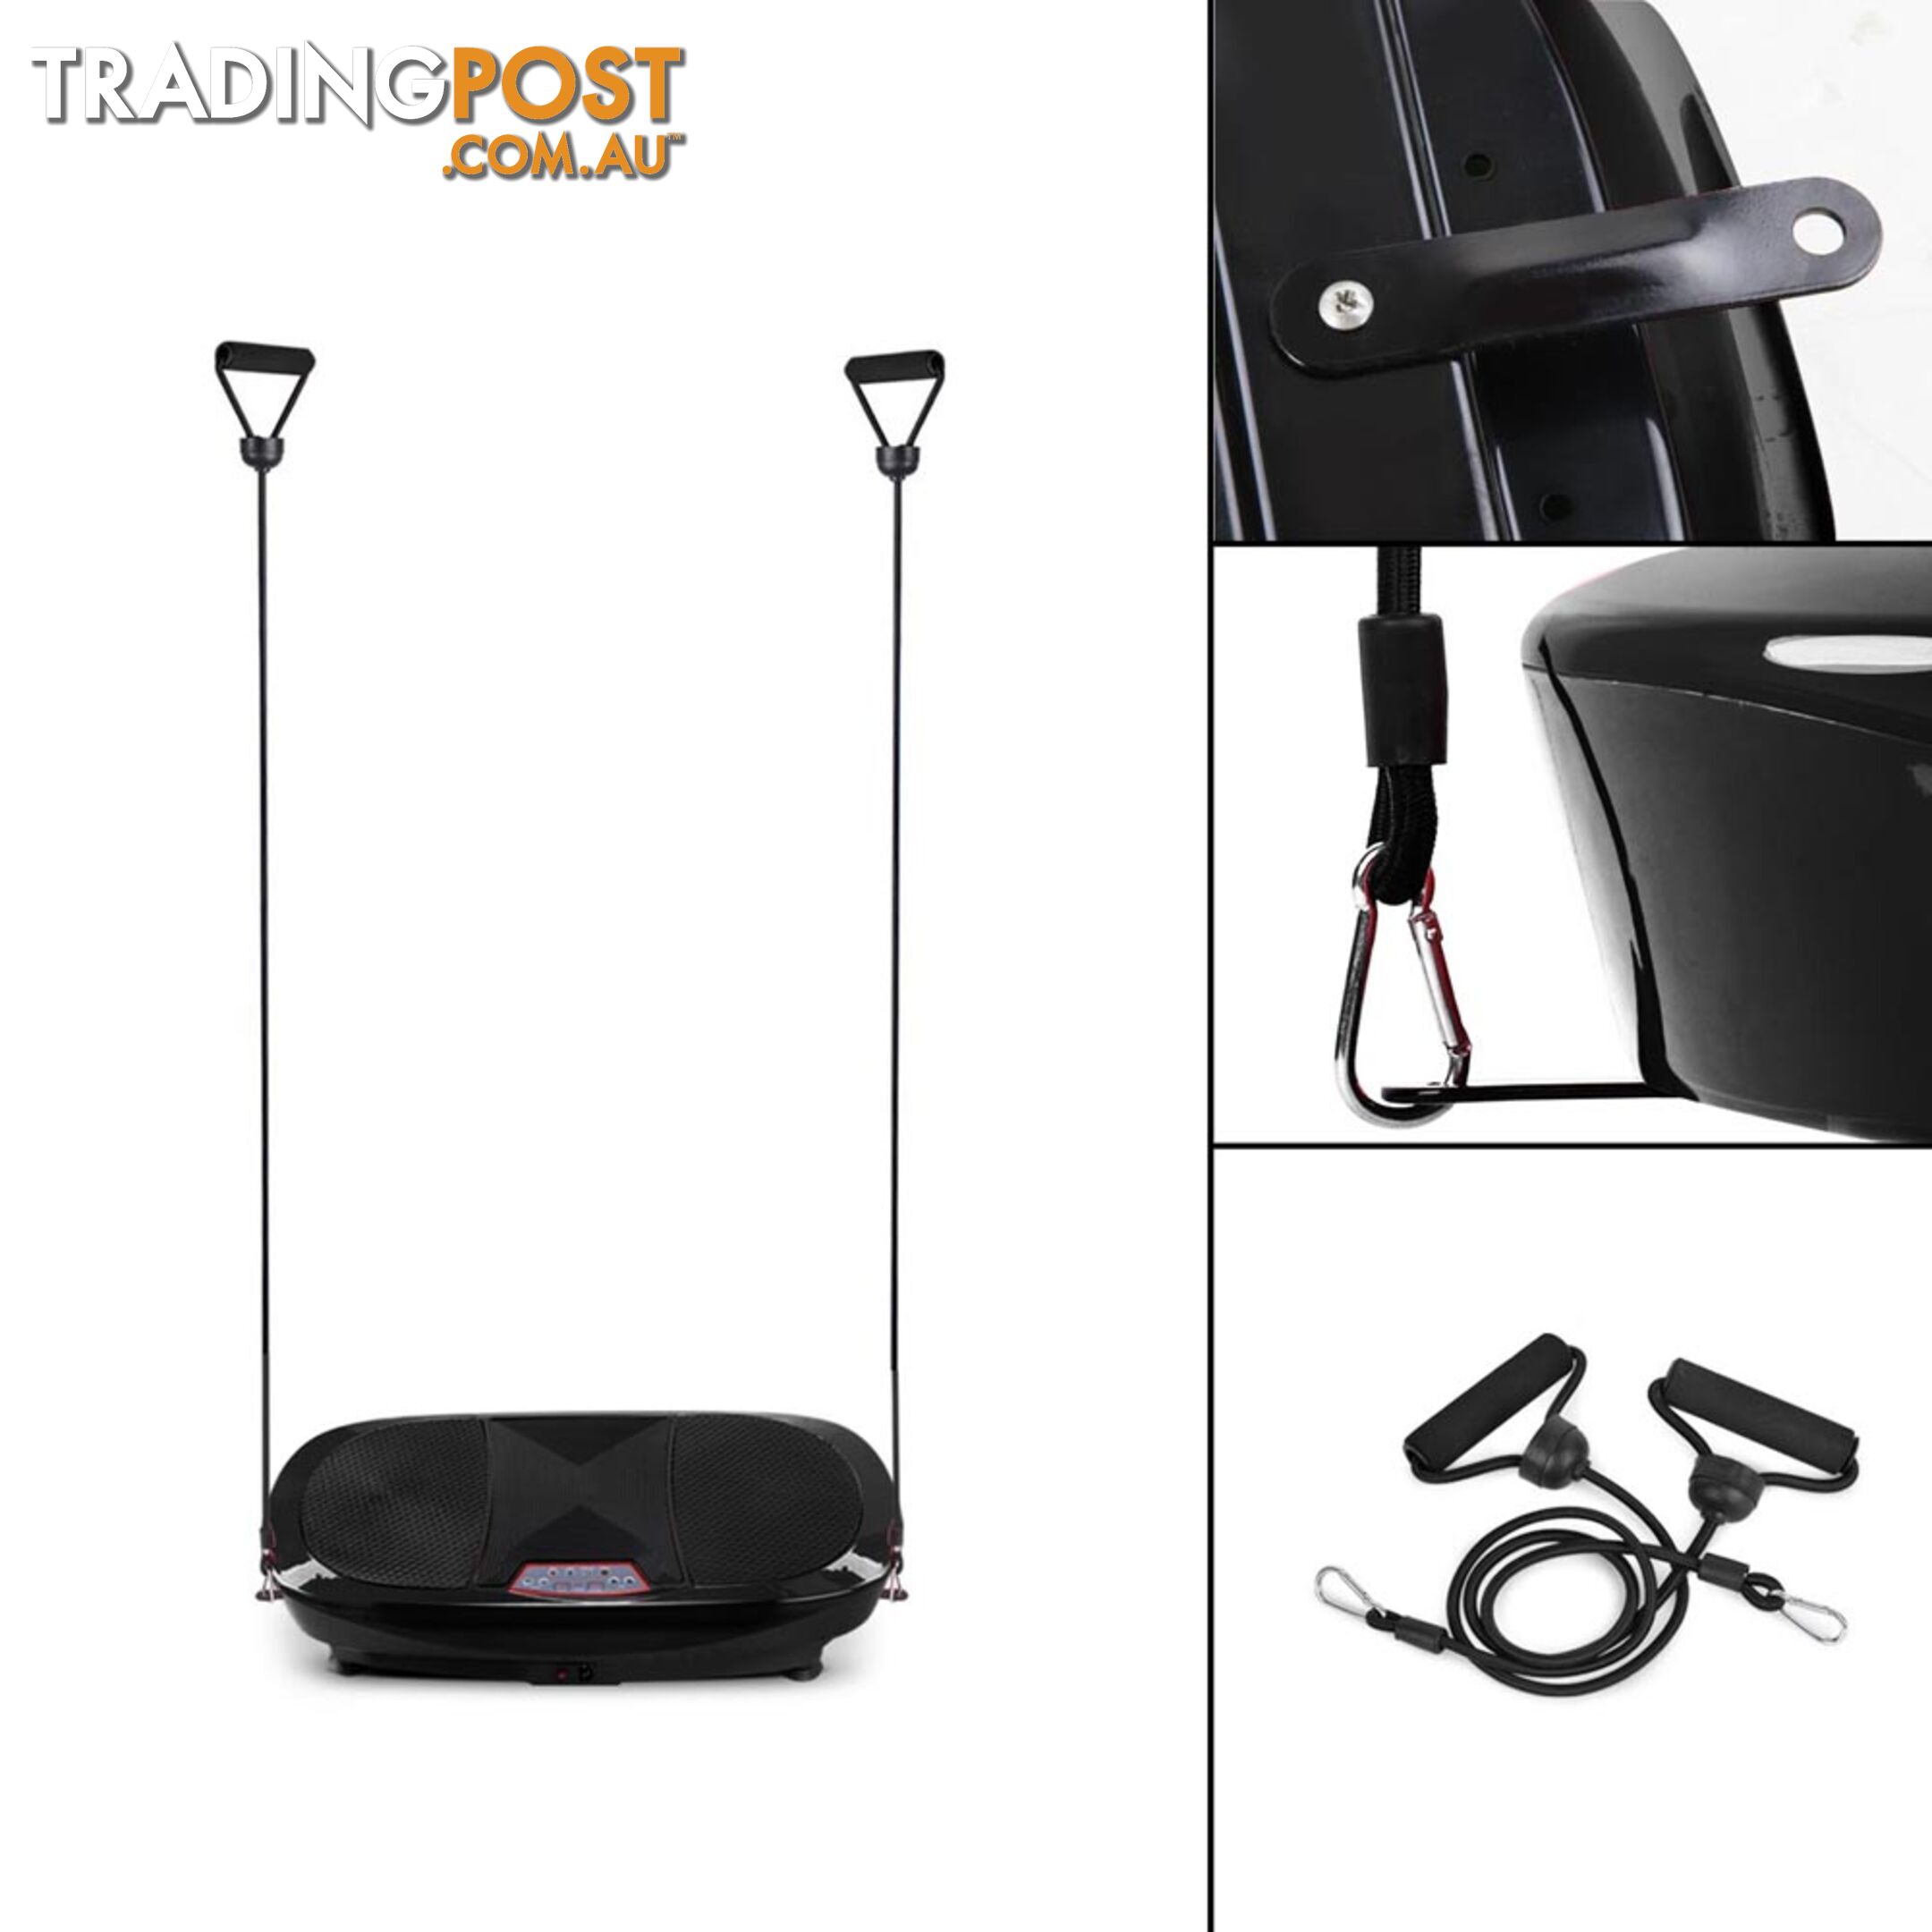 Twin Motor Vibration Plate 1200W Exercise Fitness Weight Loss Power Plate Black